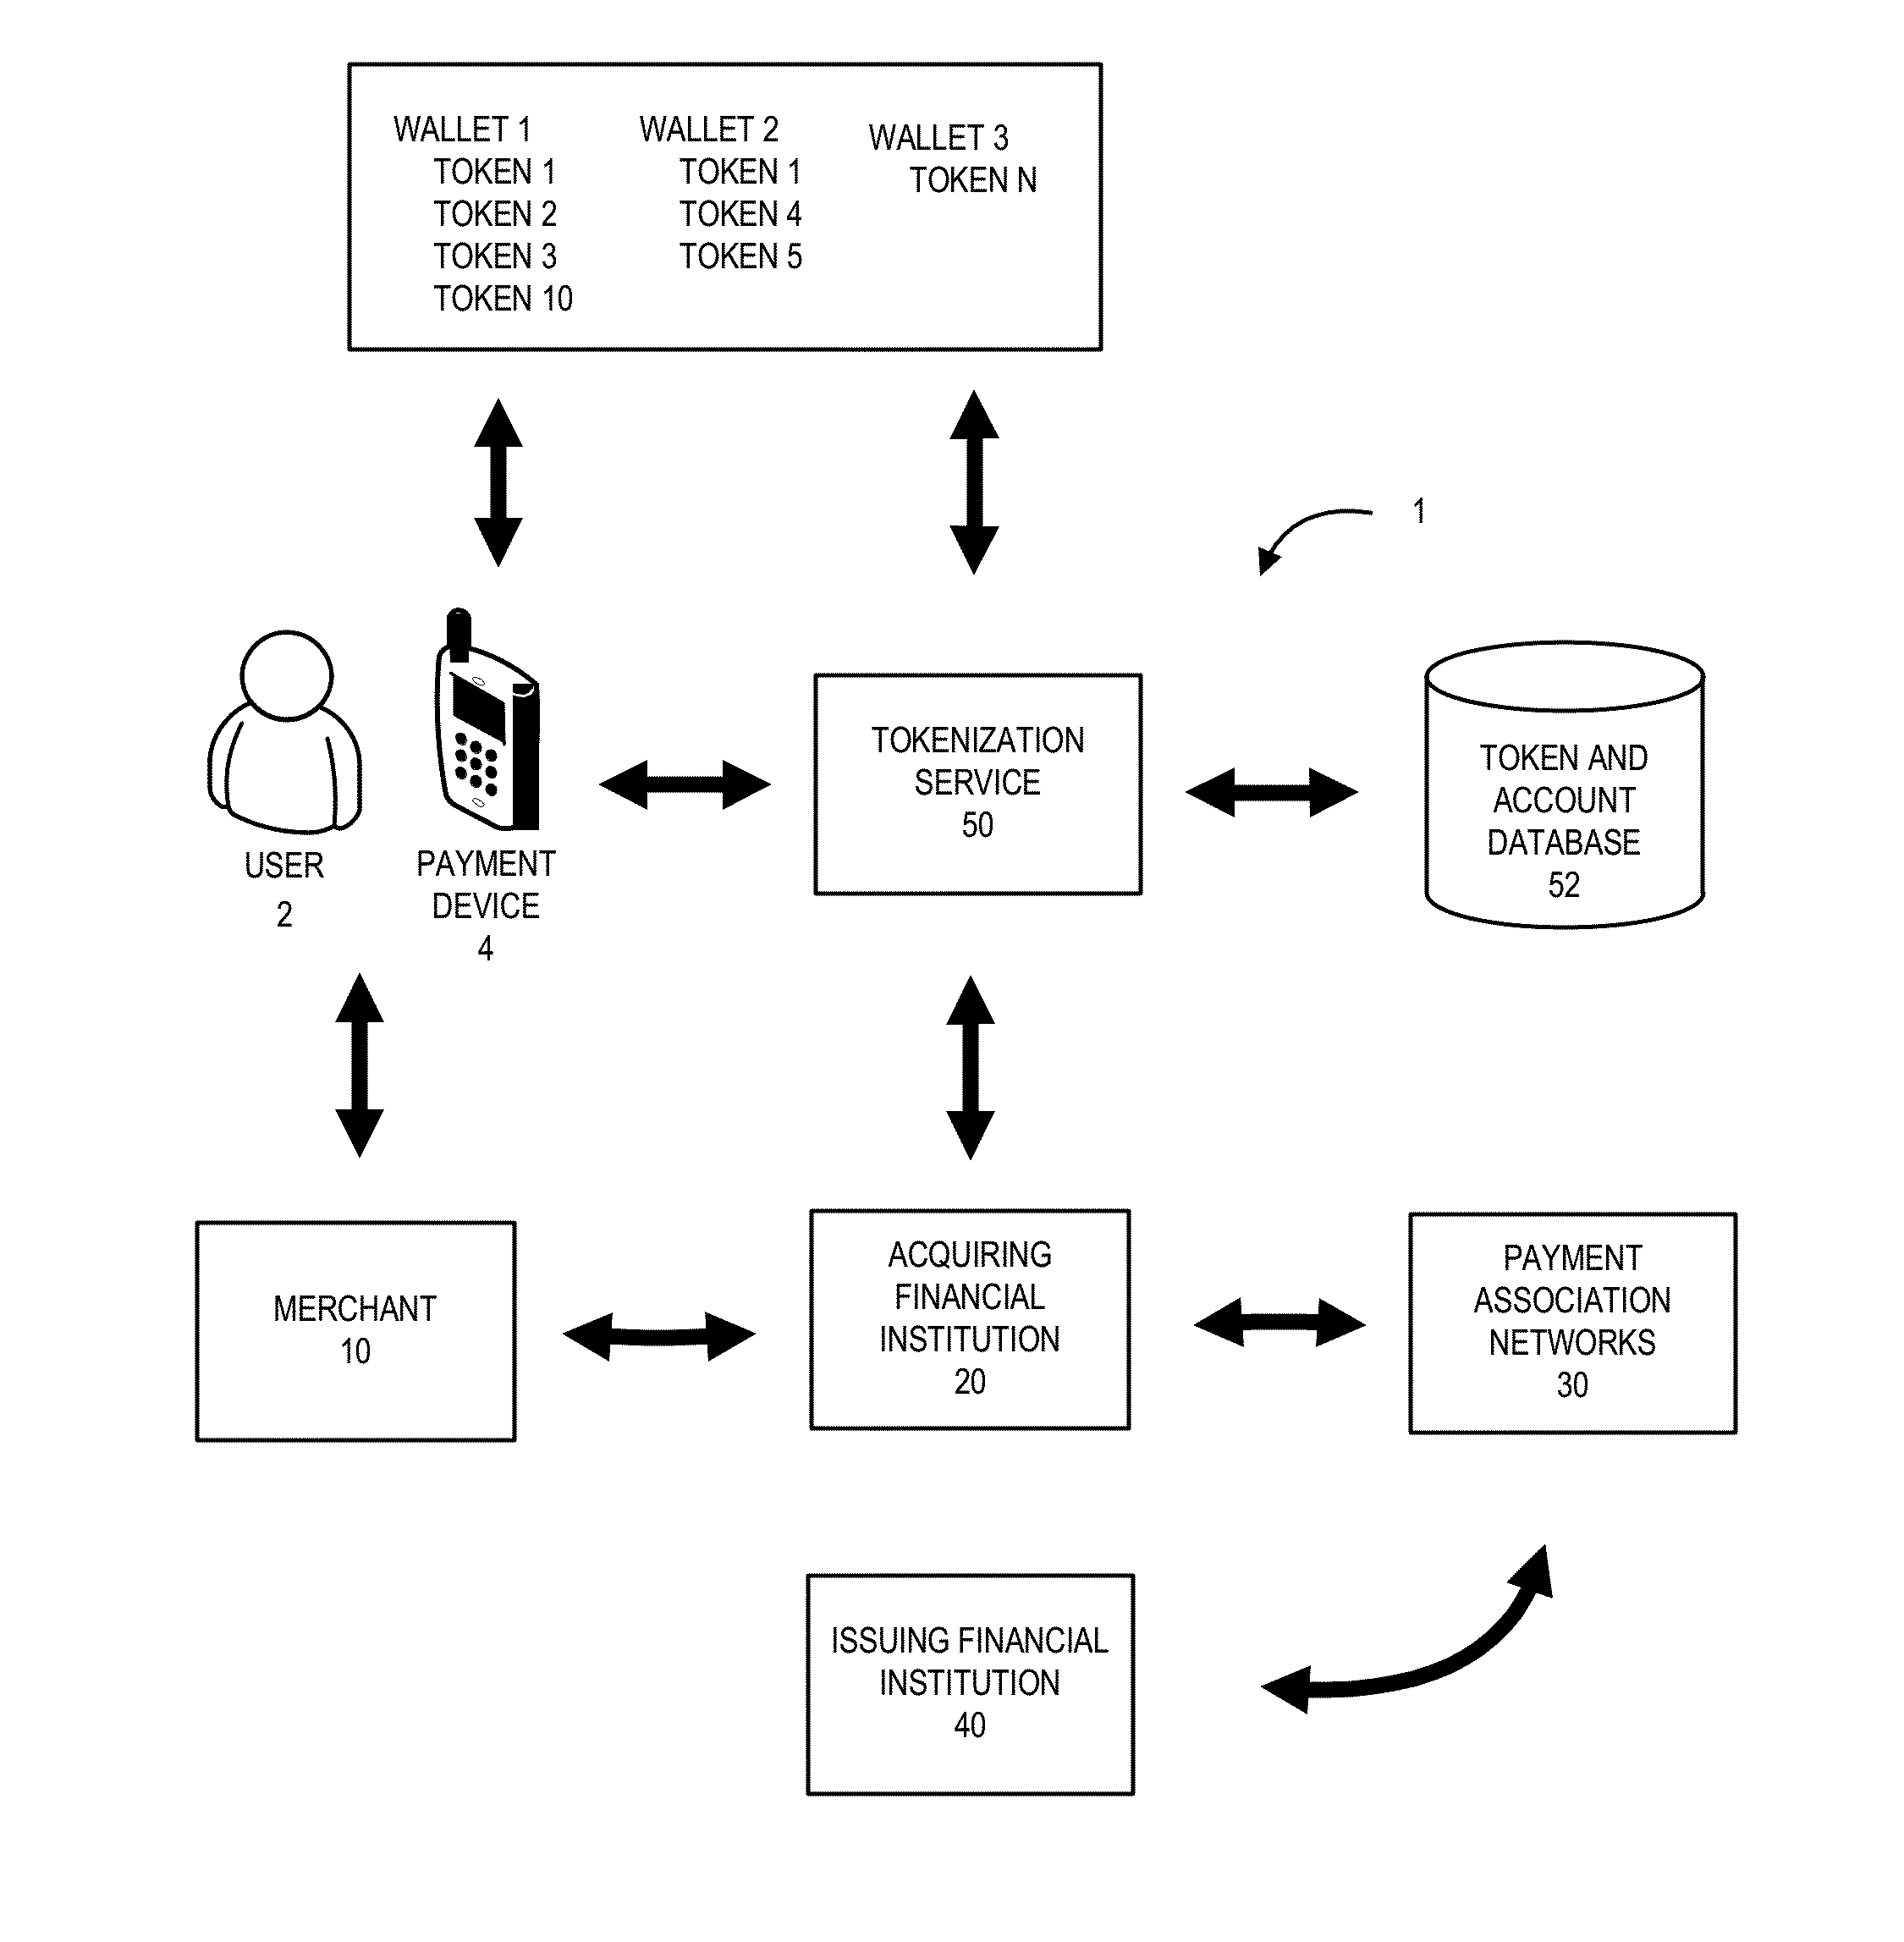 Restoring or reissuing of a token based on user authentication